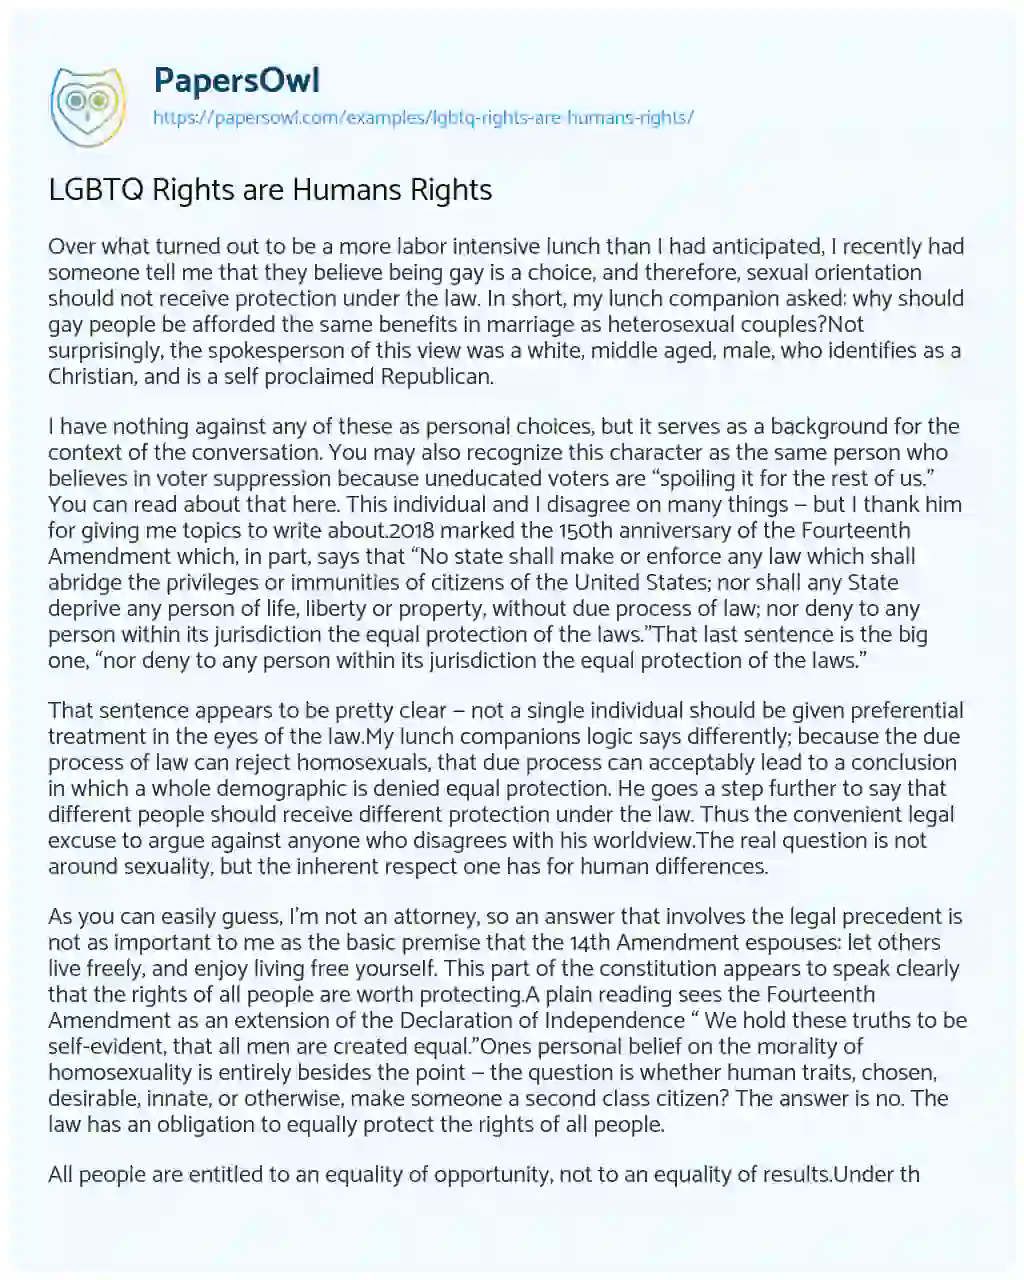 Essay on LGBTQ Rights are Humans Rights